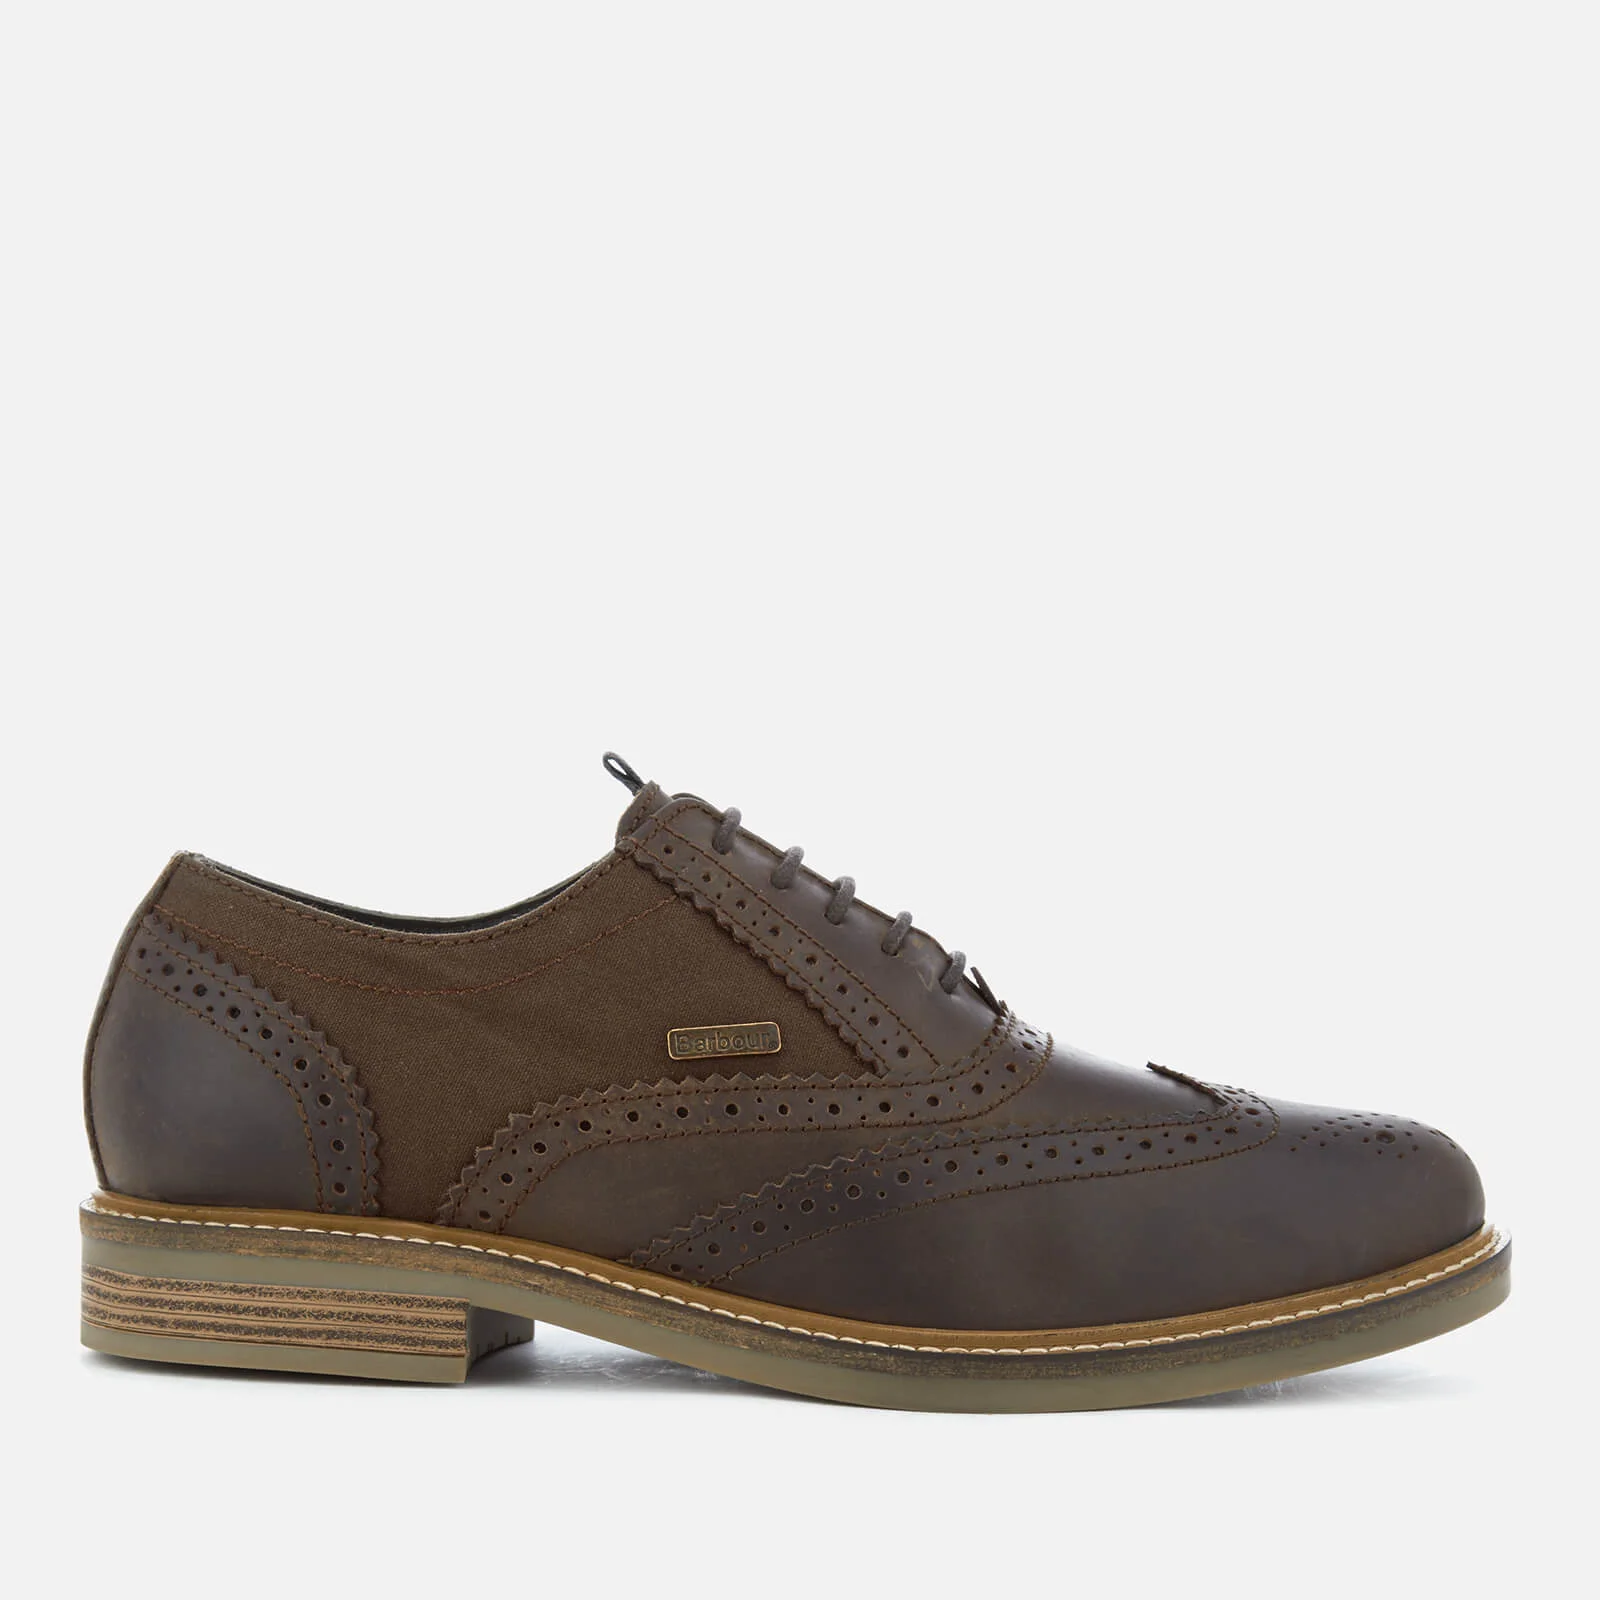 Barbour Men's Redcar Leather Oxford Brogues - Choco Image 1